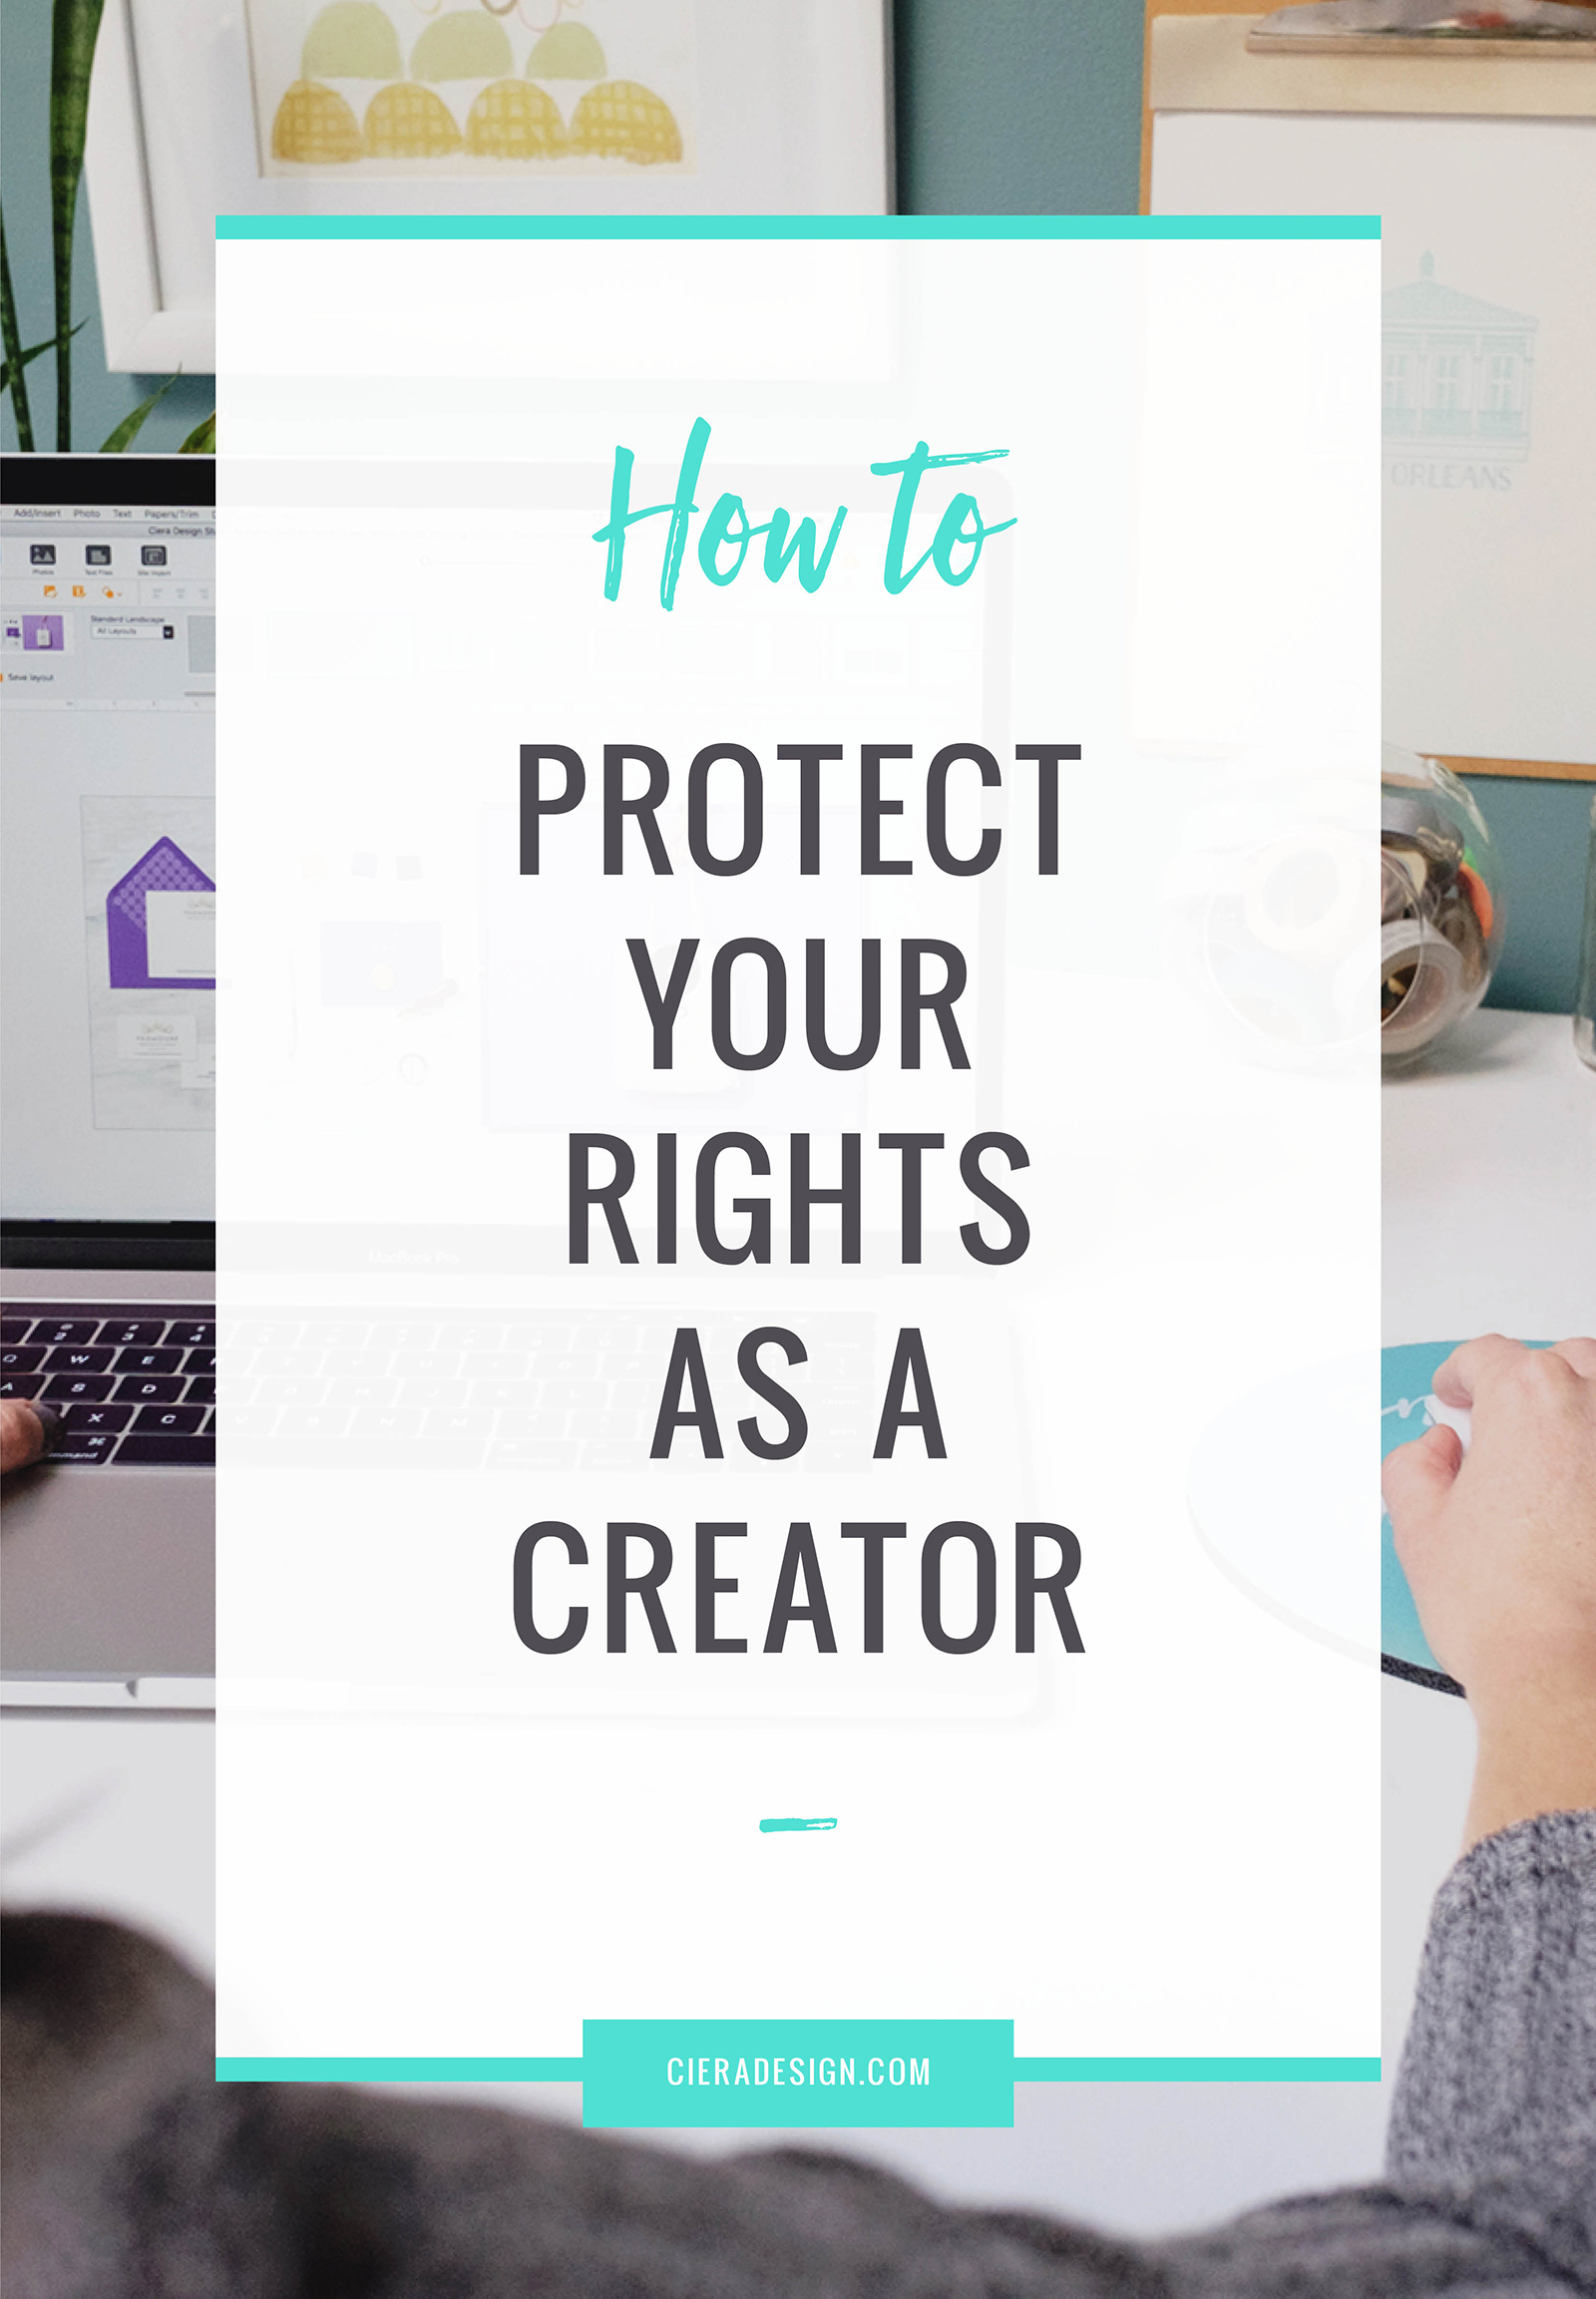 How to protect your rights as a creator, artist or innovator.